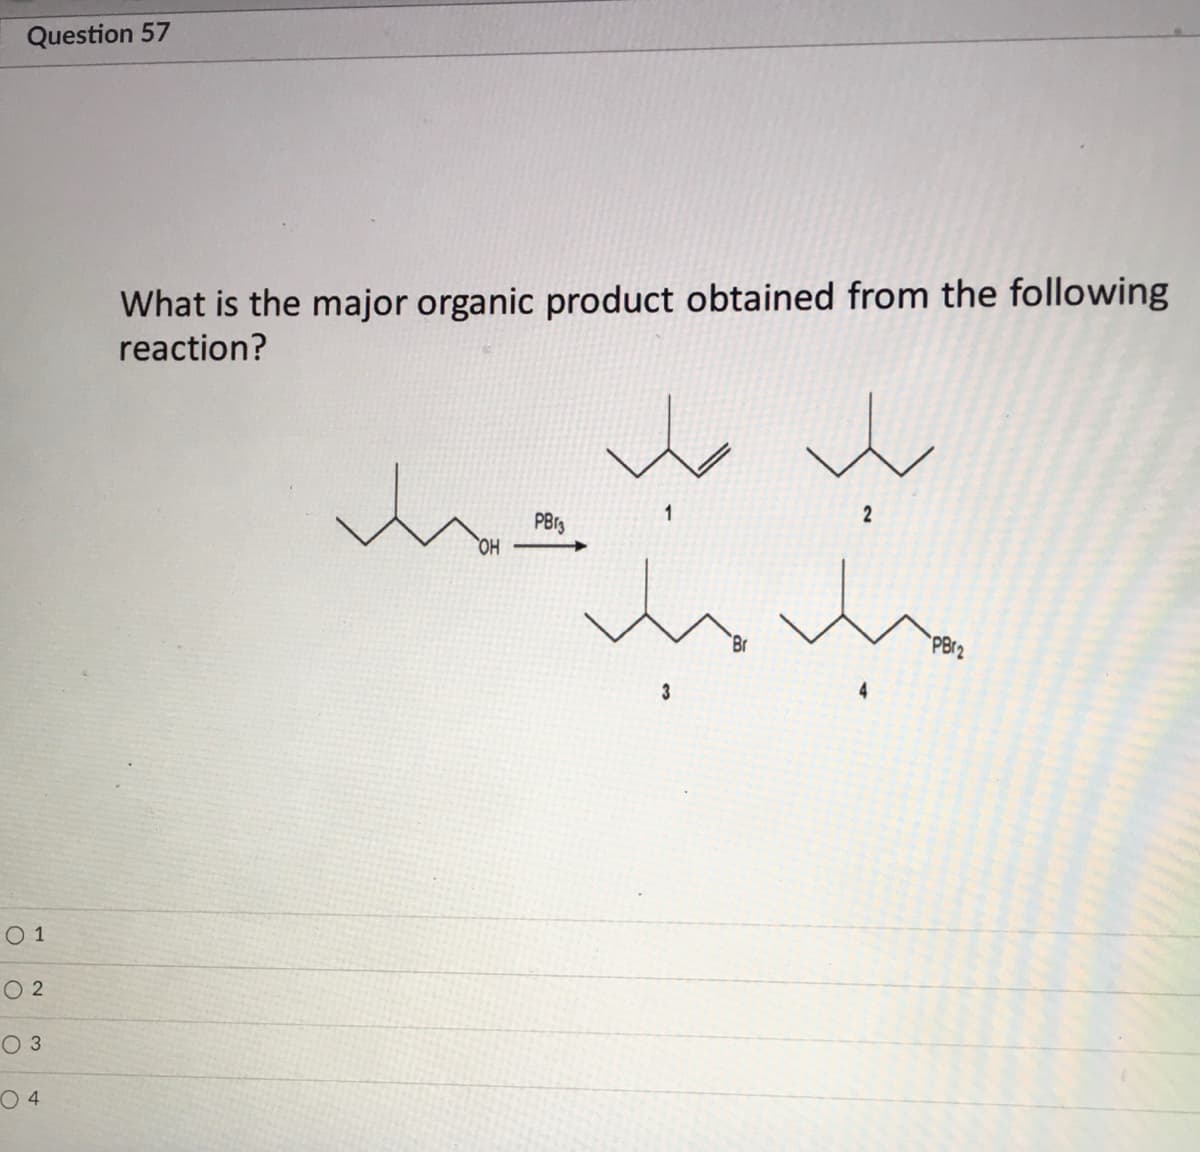 Question 57
What is the major organic product obtained from the following
reaction?
in
HO
PB(2
O 1
O 2
O 3
O 4
